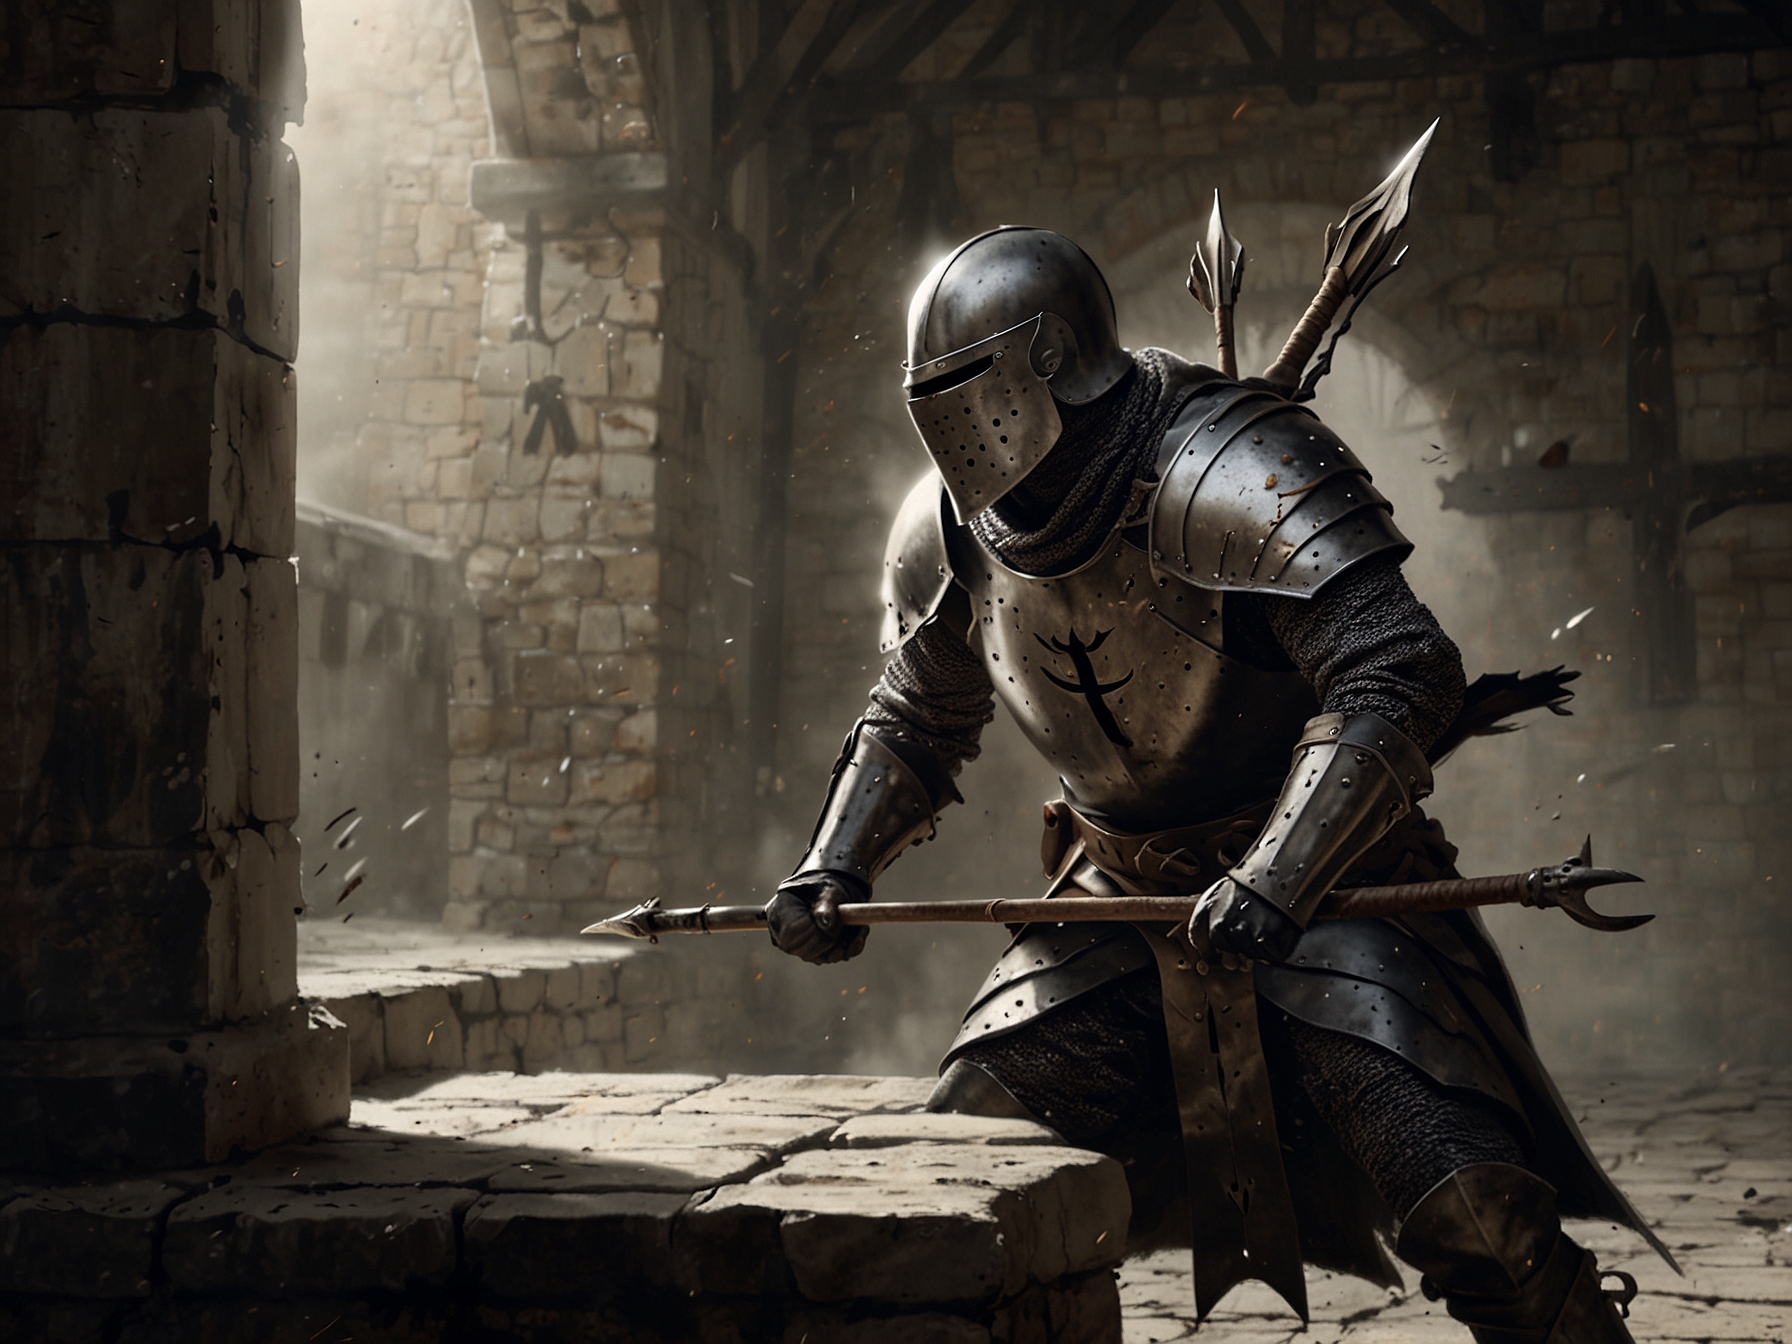 A detailed depiction of the Blackgaol Knight in mid-battle, showcasing his crossbow attack and the recommended diagonal sprint towards him to effectively dodge his fire bolts.